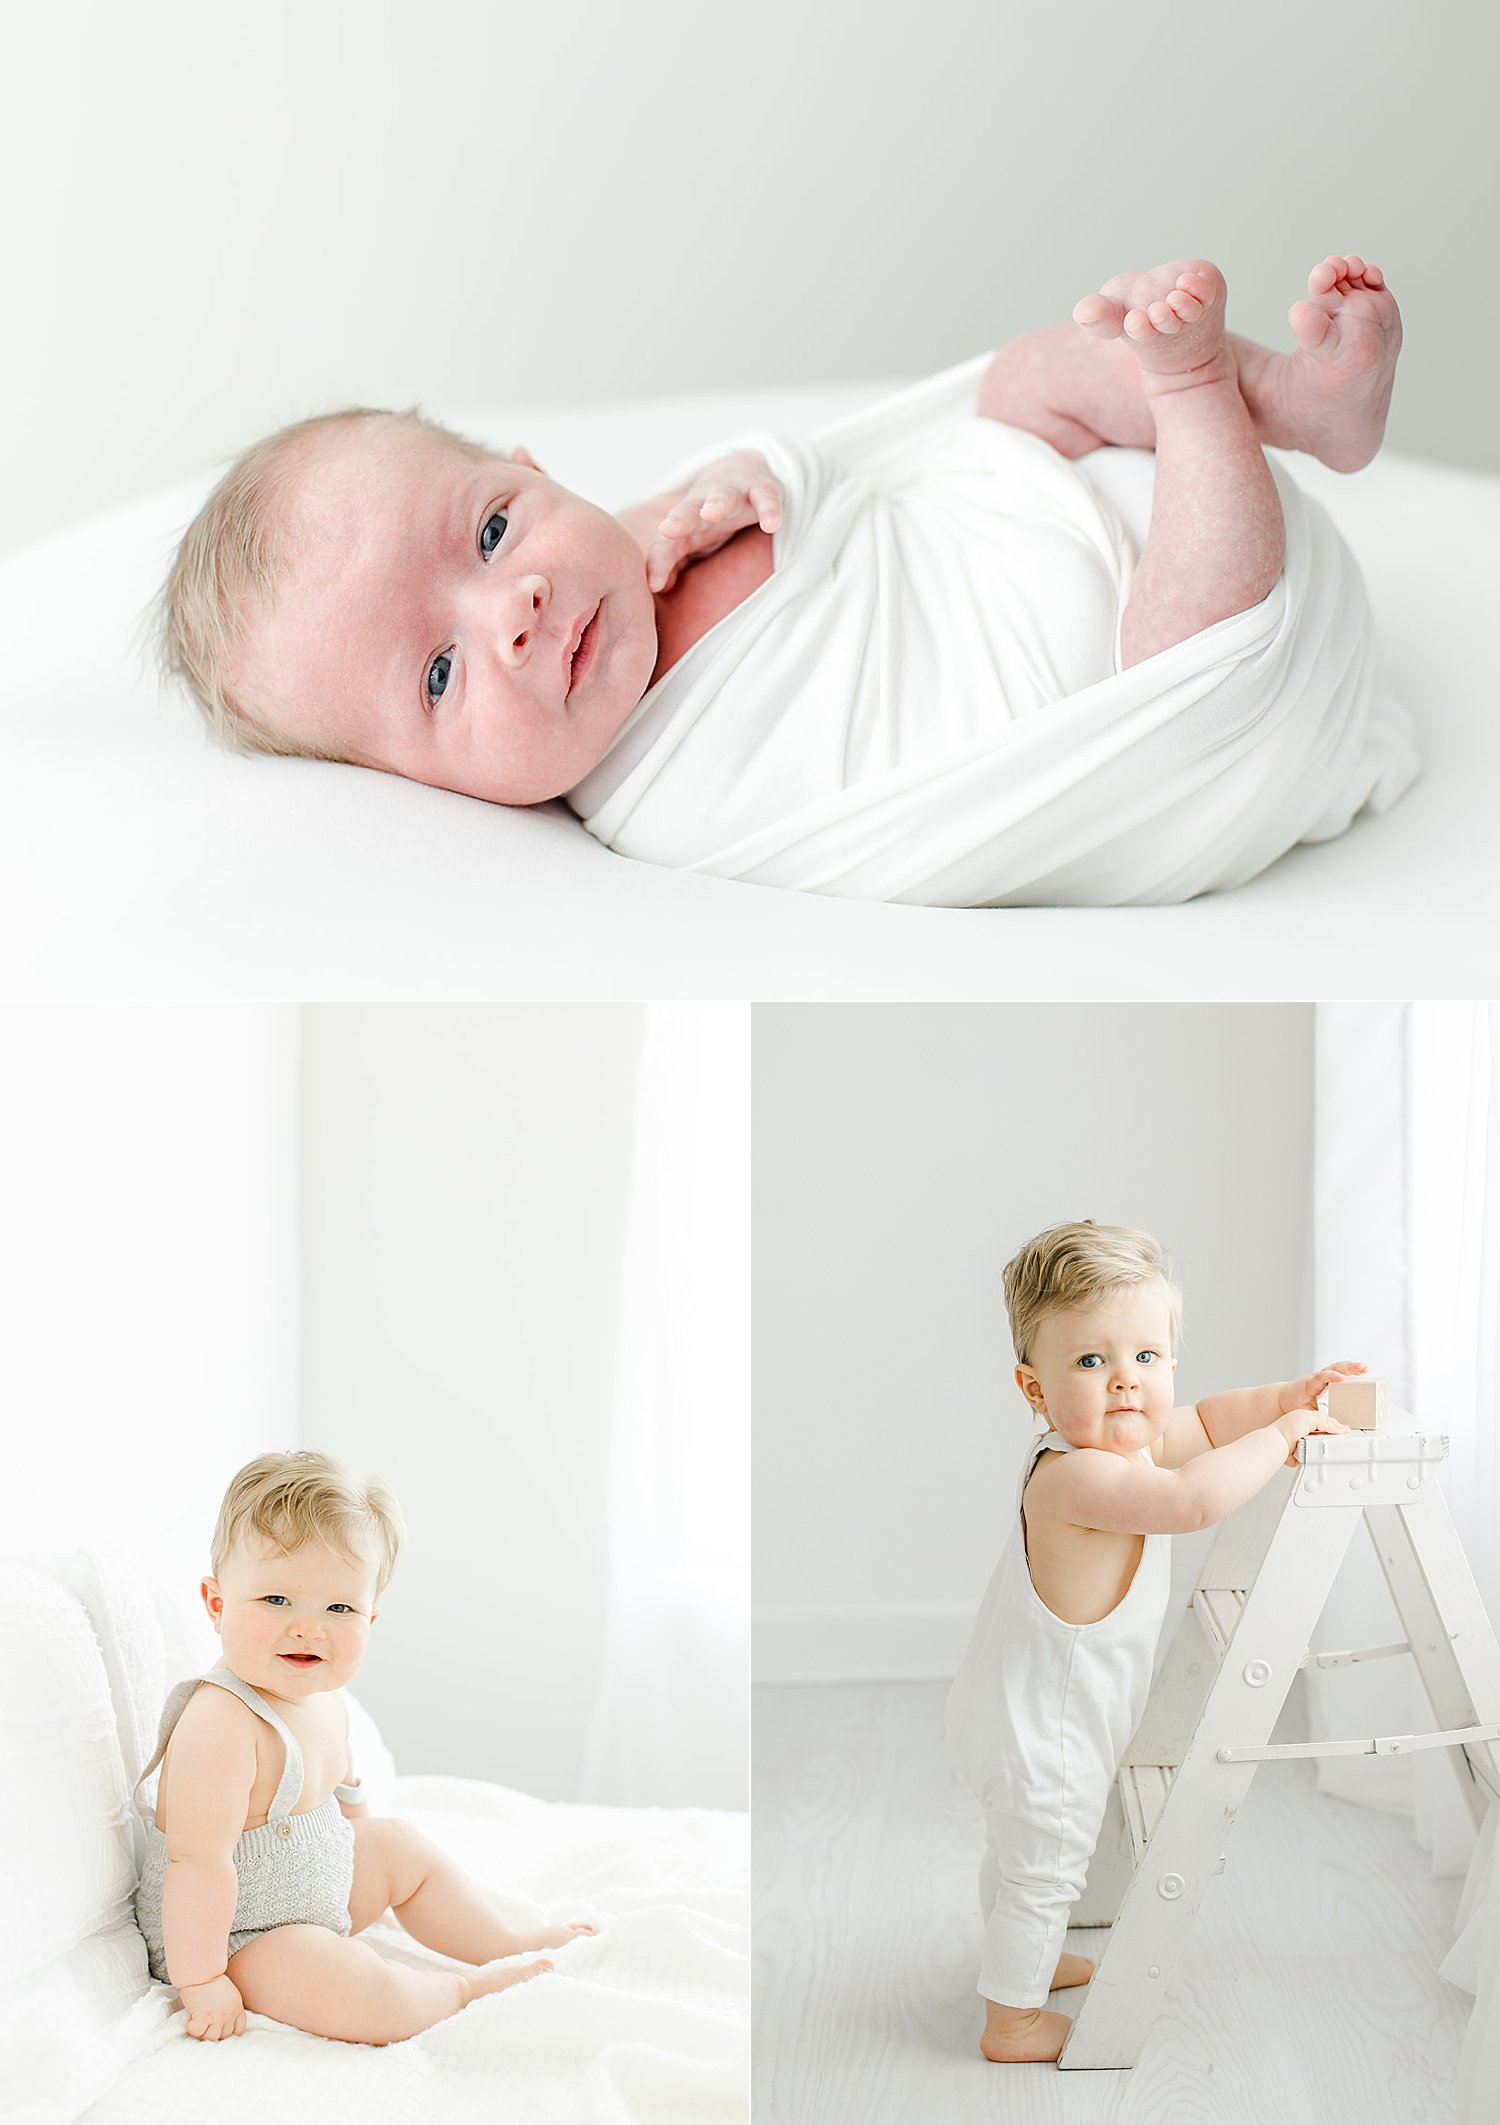 Side by side photos of baby when he was a newborn, at six months and his first birthday. Photos by Kristin Wood Photography.